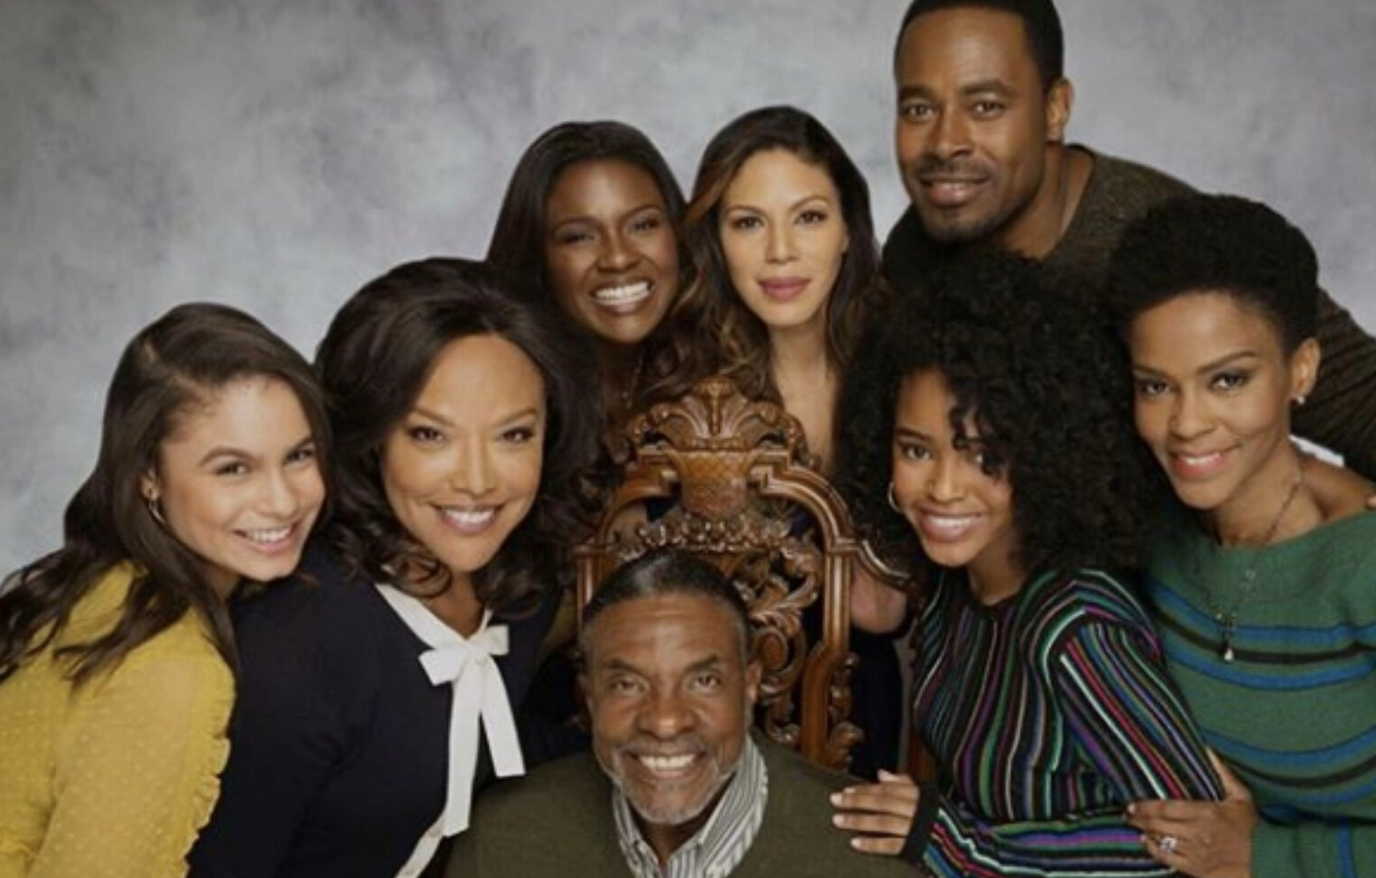 'Greenleaf' Spinoff Update: Here's What Lynn Whitfield Says About The Project